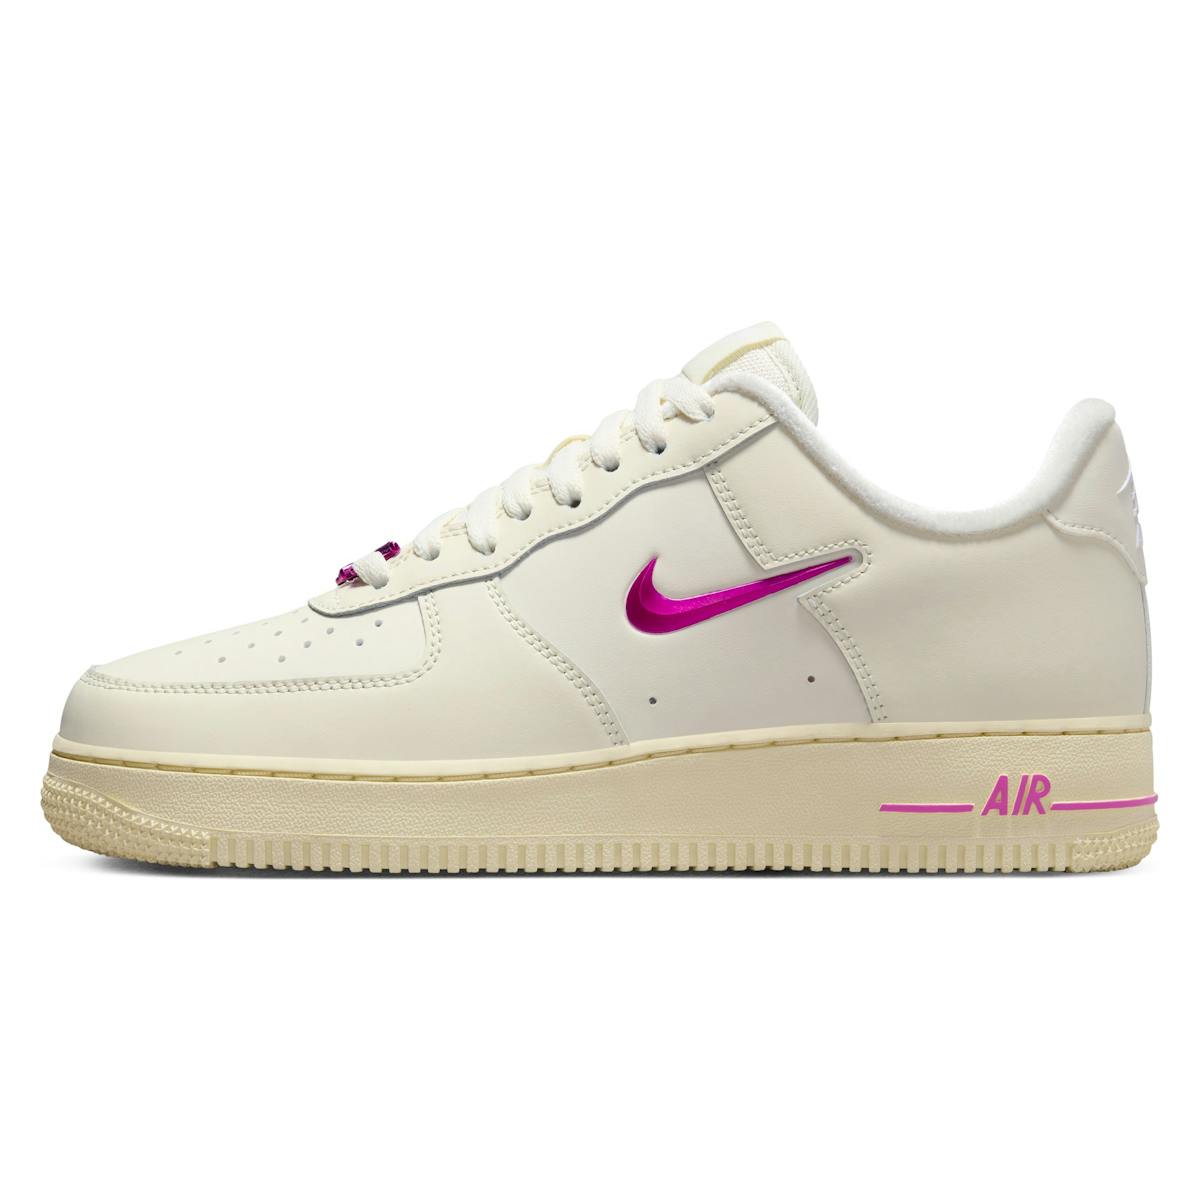 Nike Air Force 1 Low Just Do It "Playful Pink"